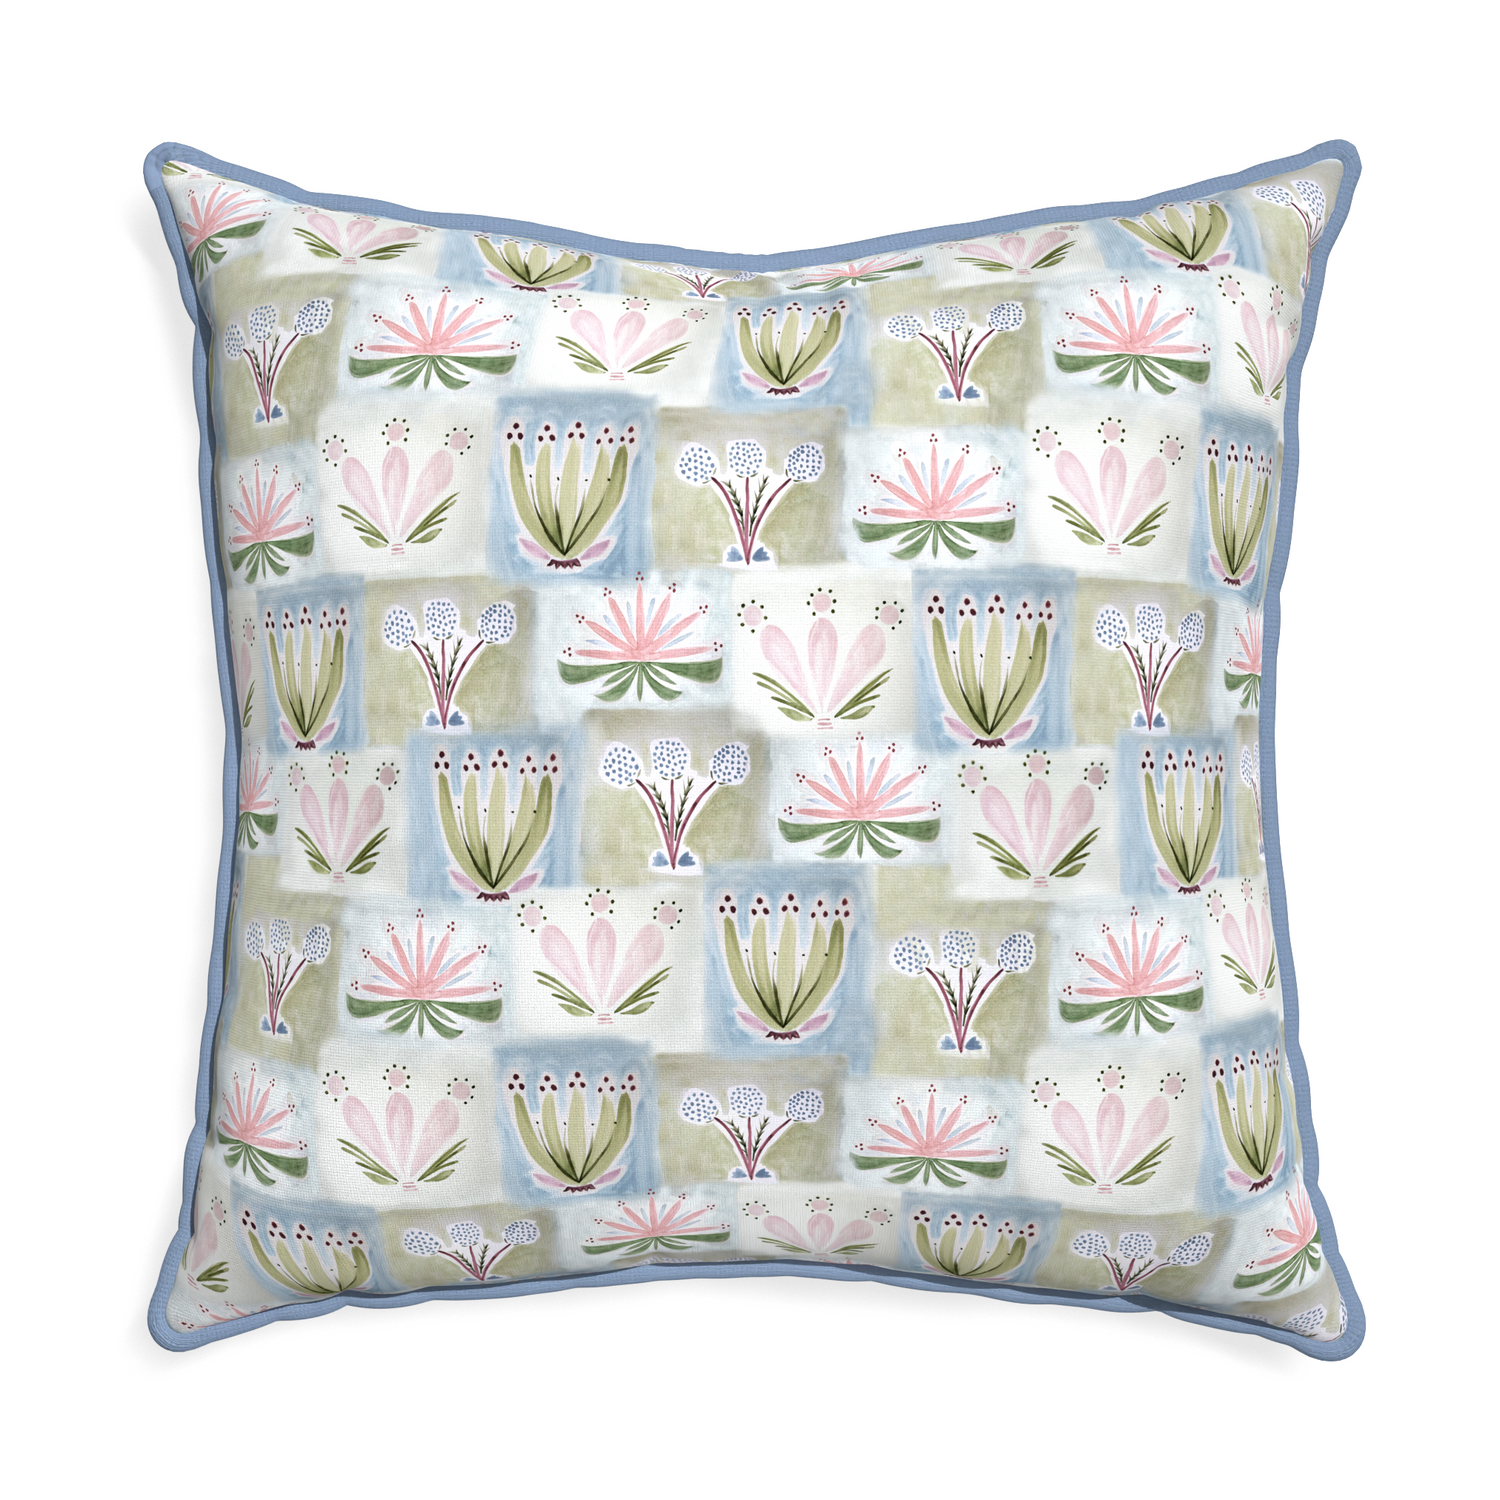 Euro-sham harper custom hand-painted floralpillow with sky piping on white background